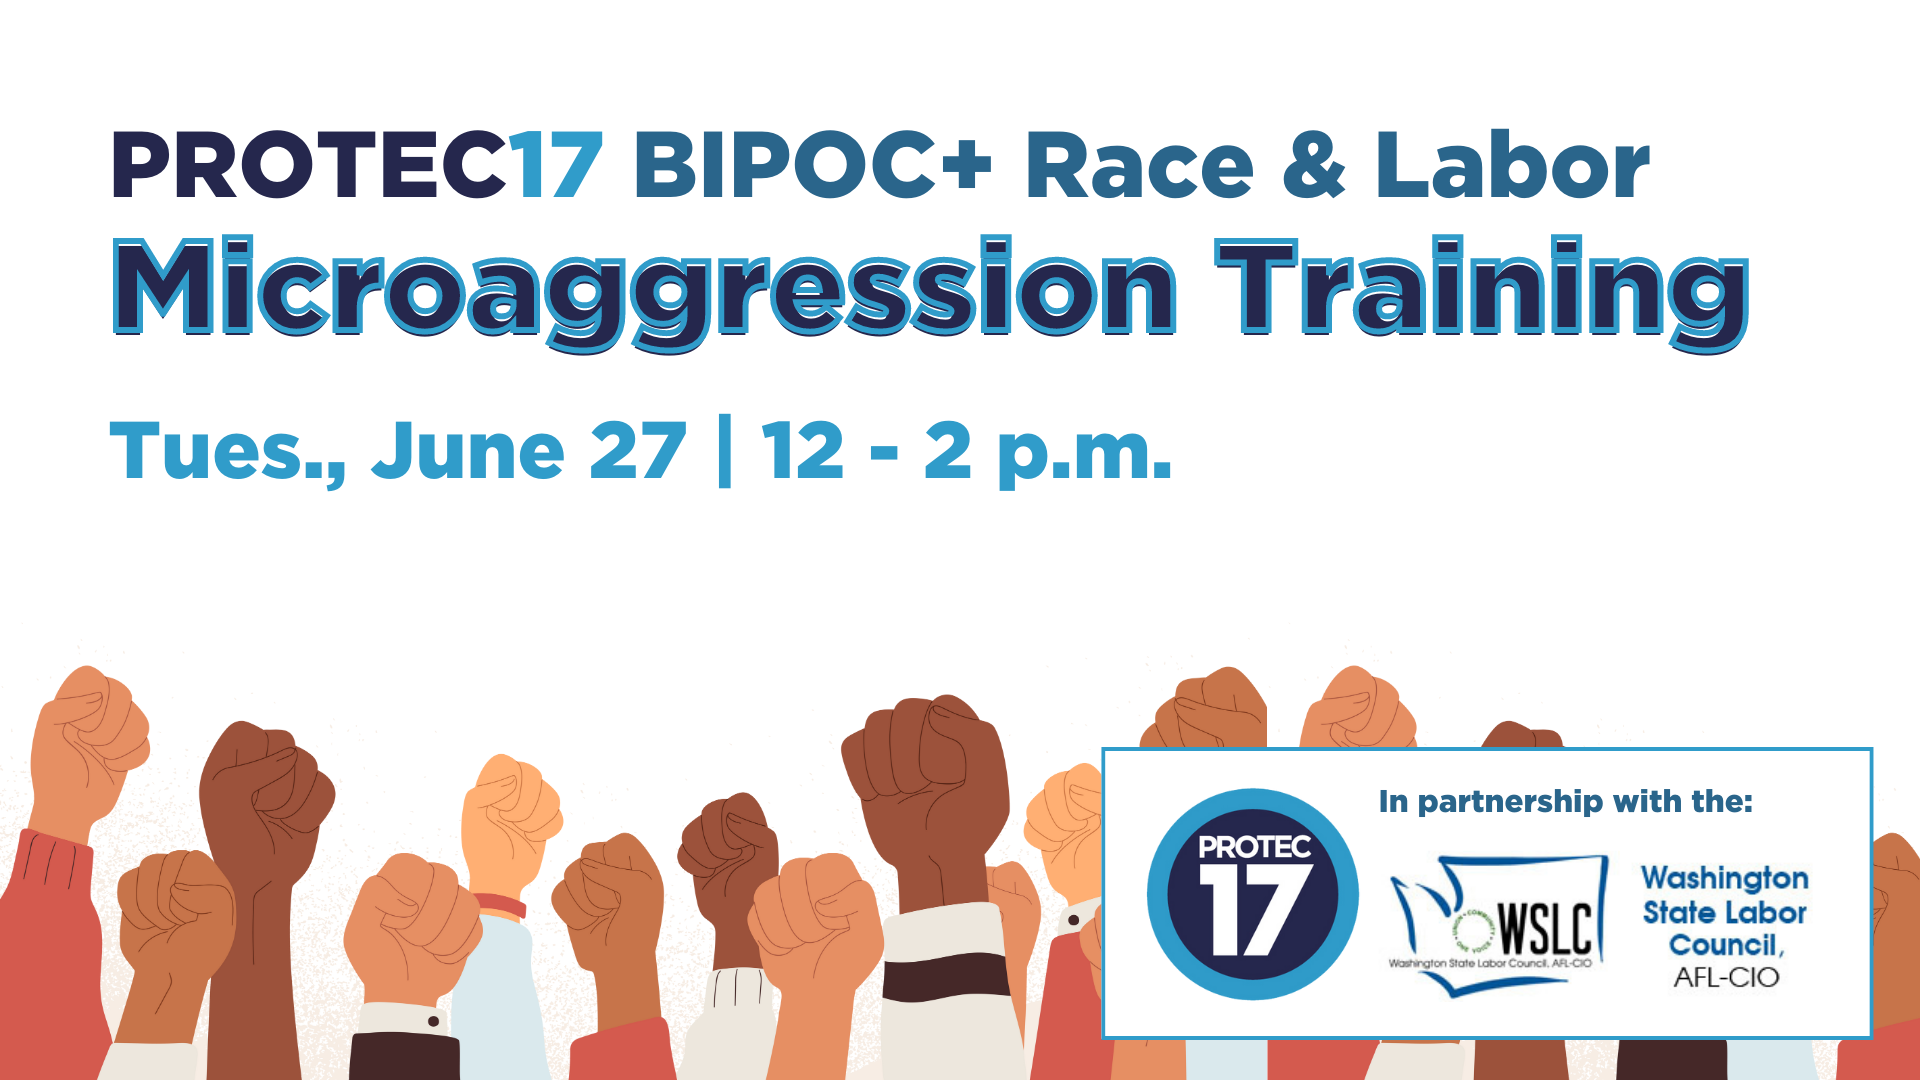 Text reads, PROTEC17 BIPOC+ Race & Labor Microaggression Training | Tues., June 27 | 12 - 2 p.m." There is a colorful illustration of folks from different racial backgrounds holding raised fists in solidarity. The PROTEC17 logo and Washington State Labor Council (WSLC) logo is pictured.